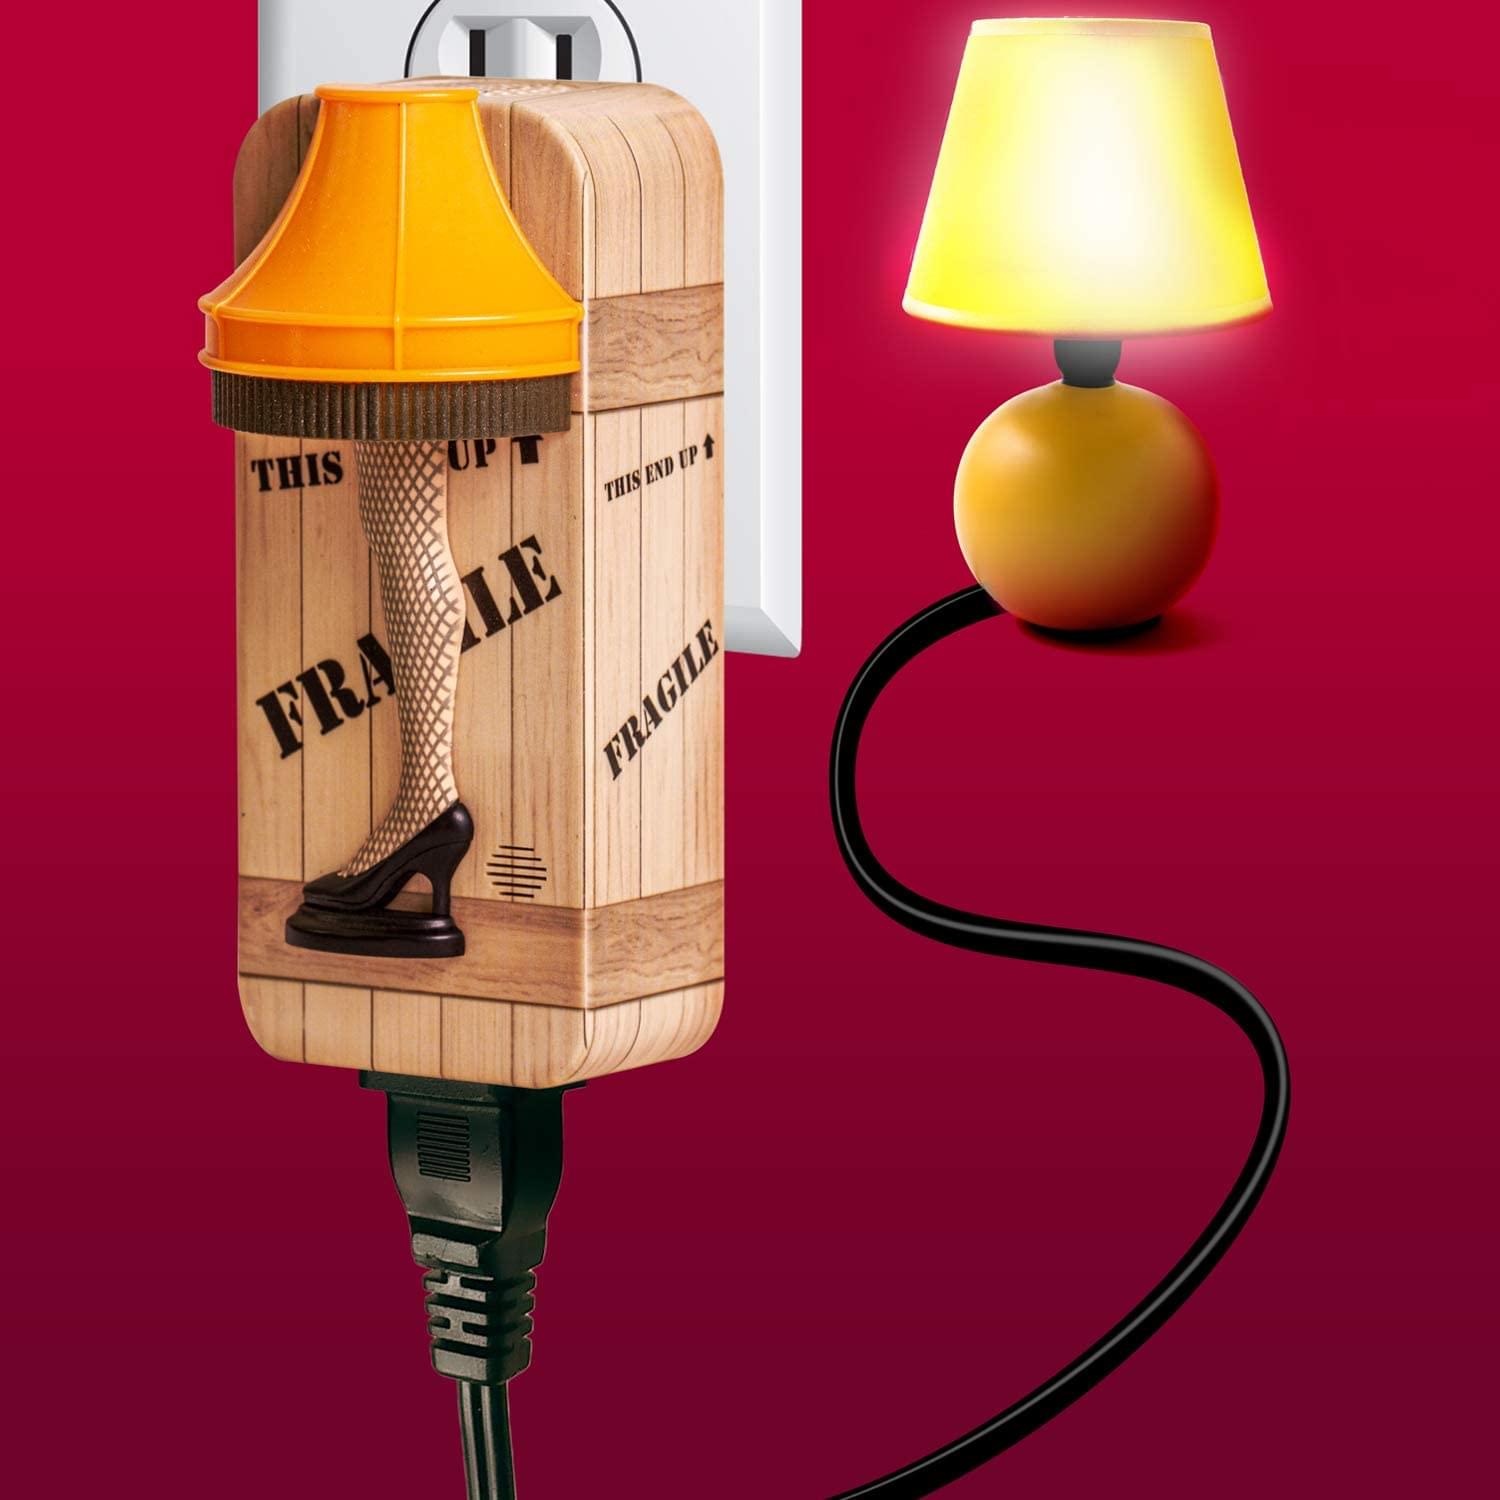 A Christmas Story Leg Lamp Talking Clapper Sound Activated Switch